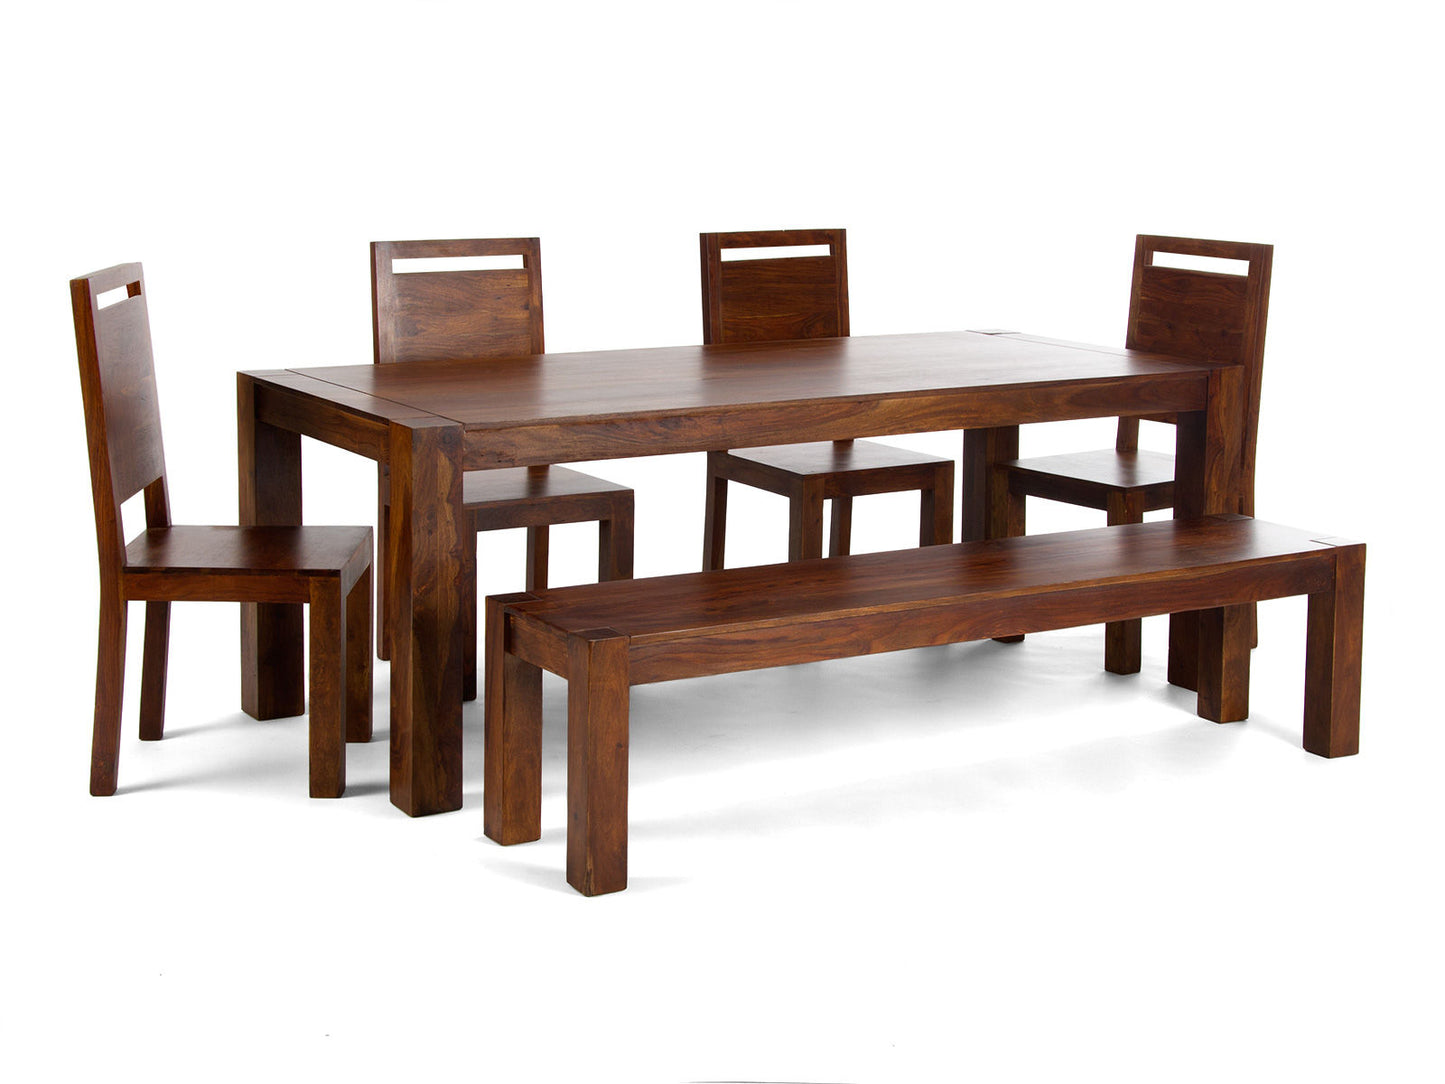 Six seater dining table with four chairs and bench made of solid sheesham wood